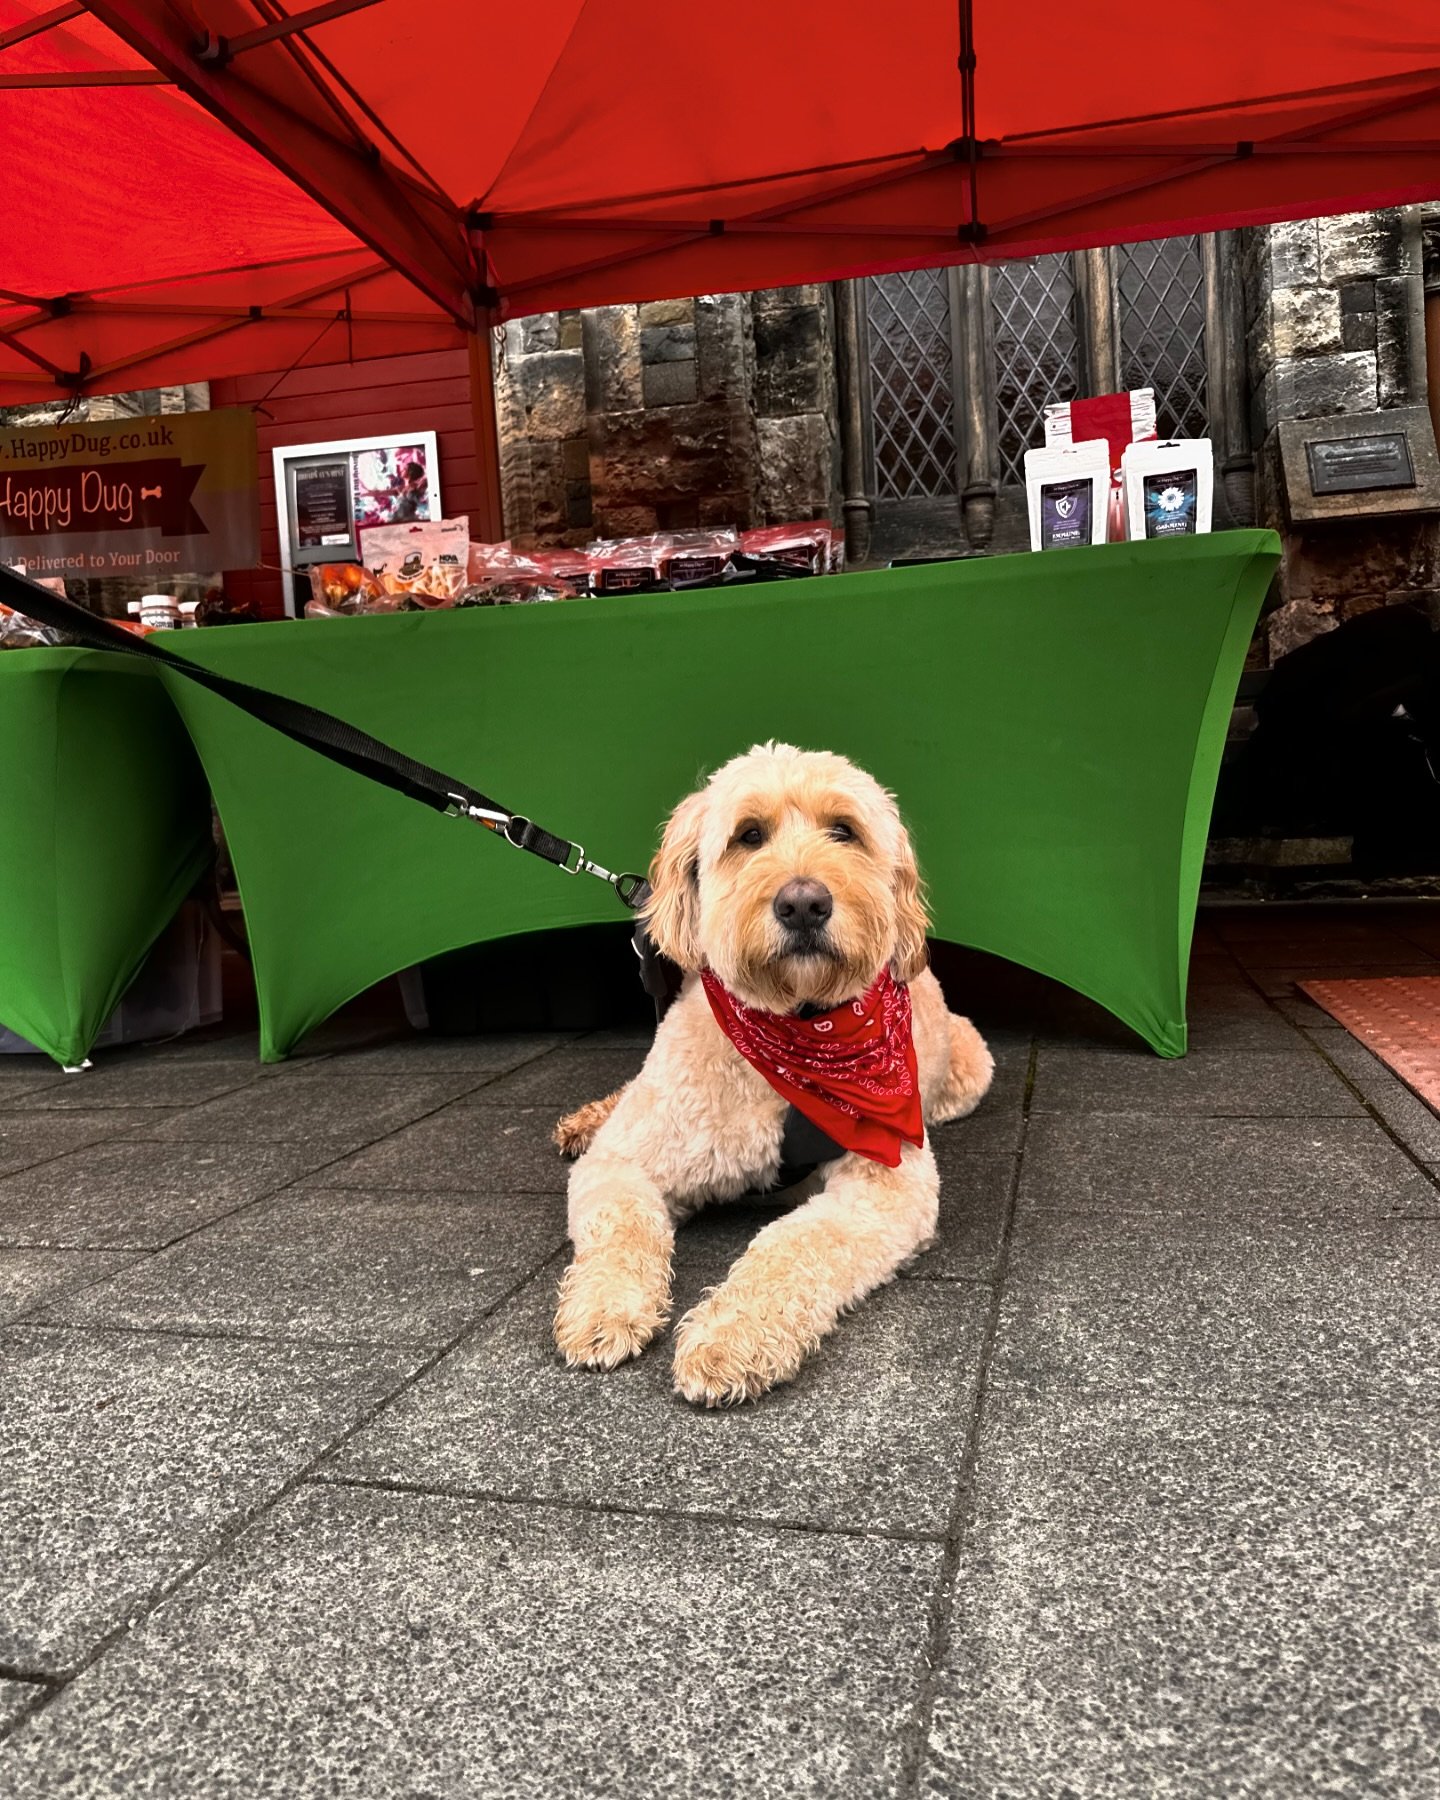 After sniffing out what our stall is all about, Sunny didn&rsquo;t want to leave!  #dogsofinstagram #happydugpetfood #dogtreats #hypoallergenic #treats #petfood #peebles @peebles_market